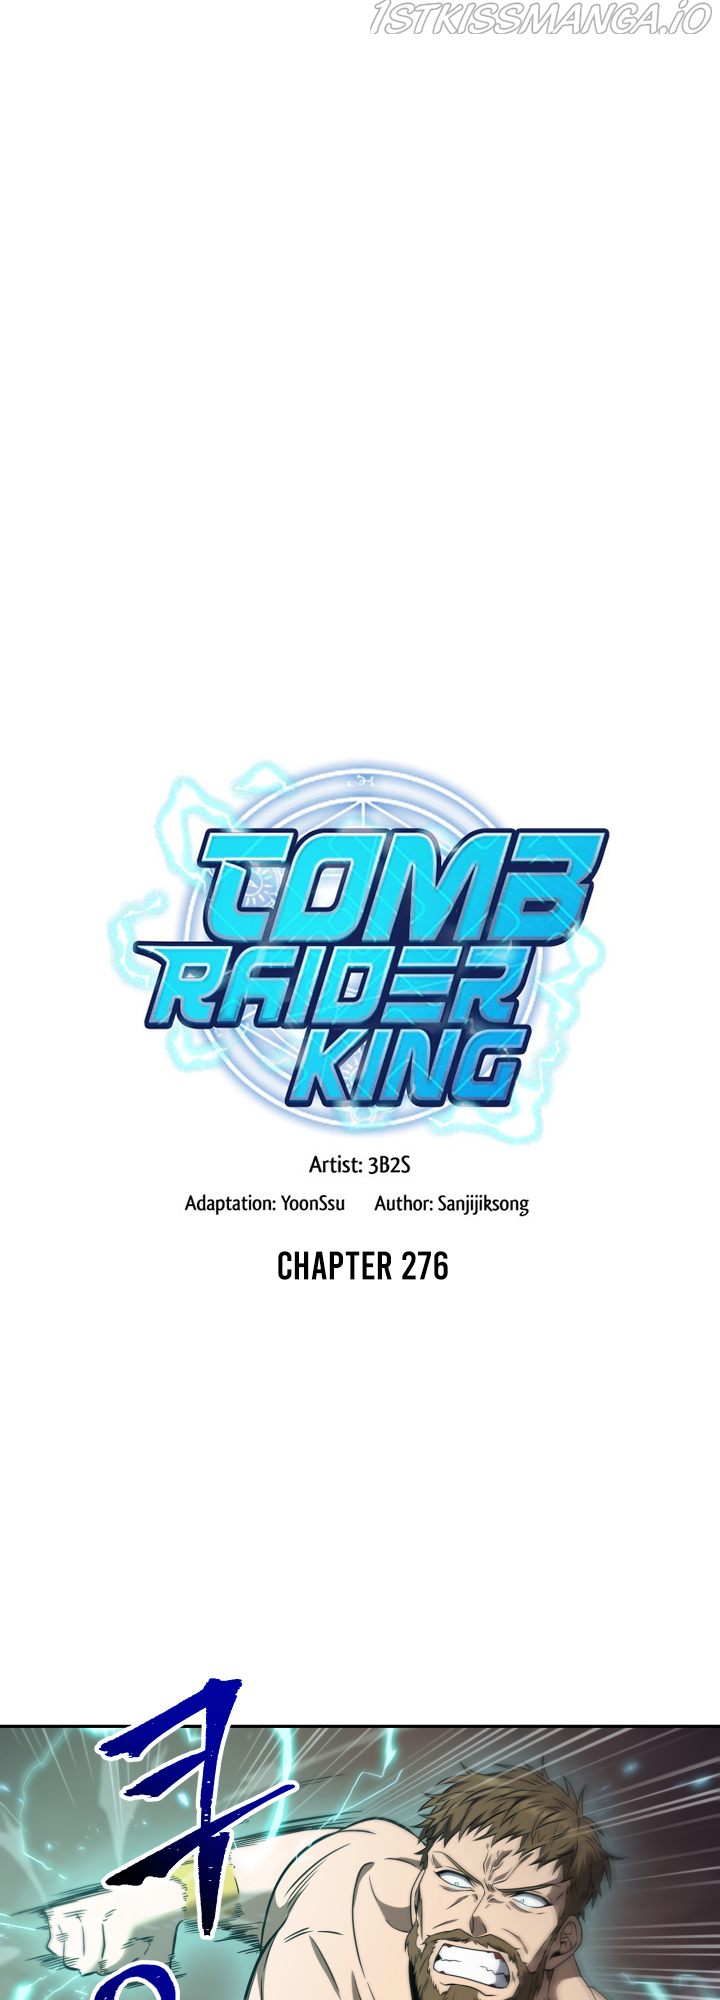 Tomb Raider King Chapter 276 - Page 1